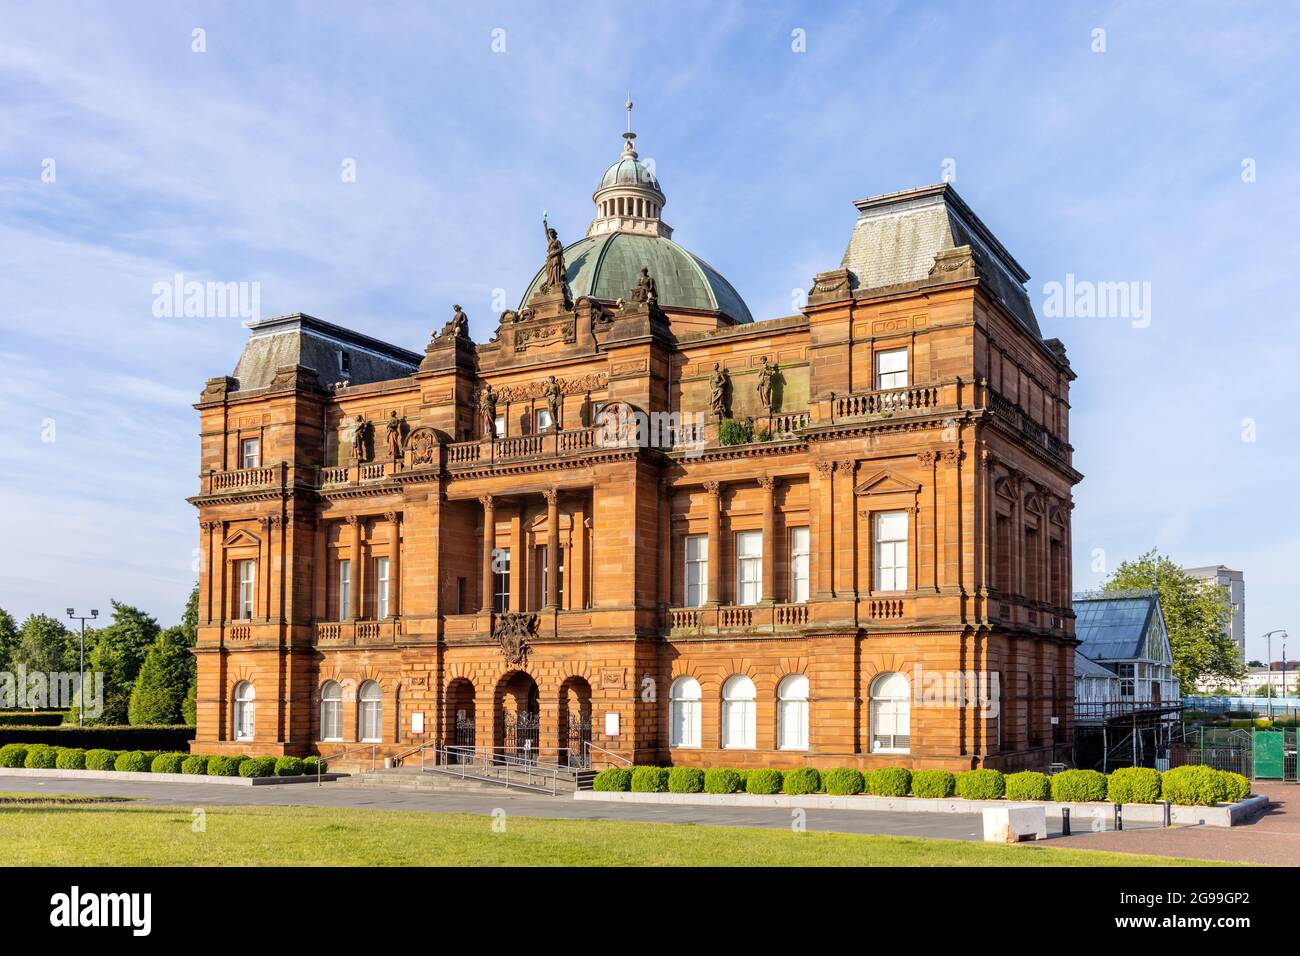 The People’s Palace is a social history museum set in historic Glasgow Green in Scotland, Uk Stock Photo